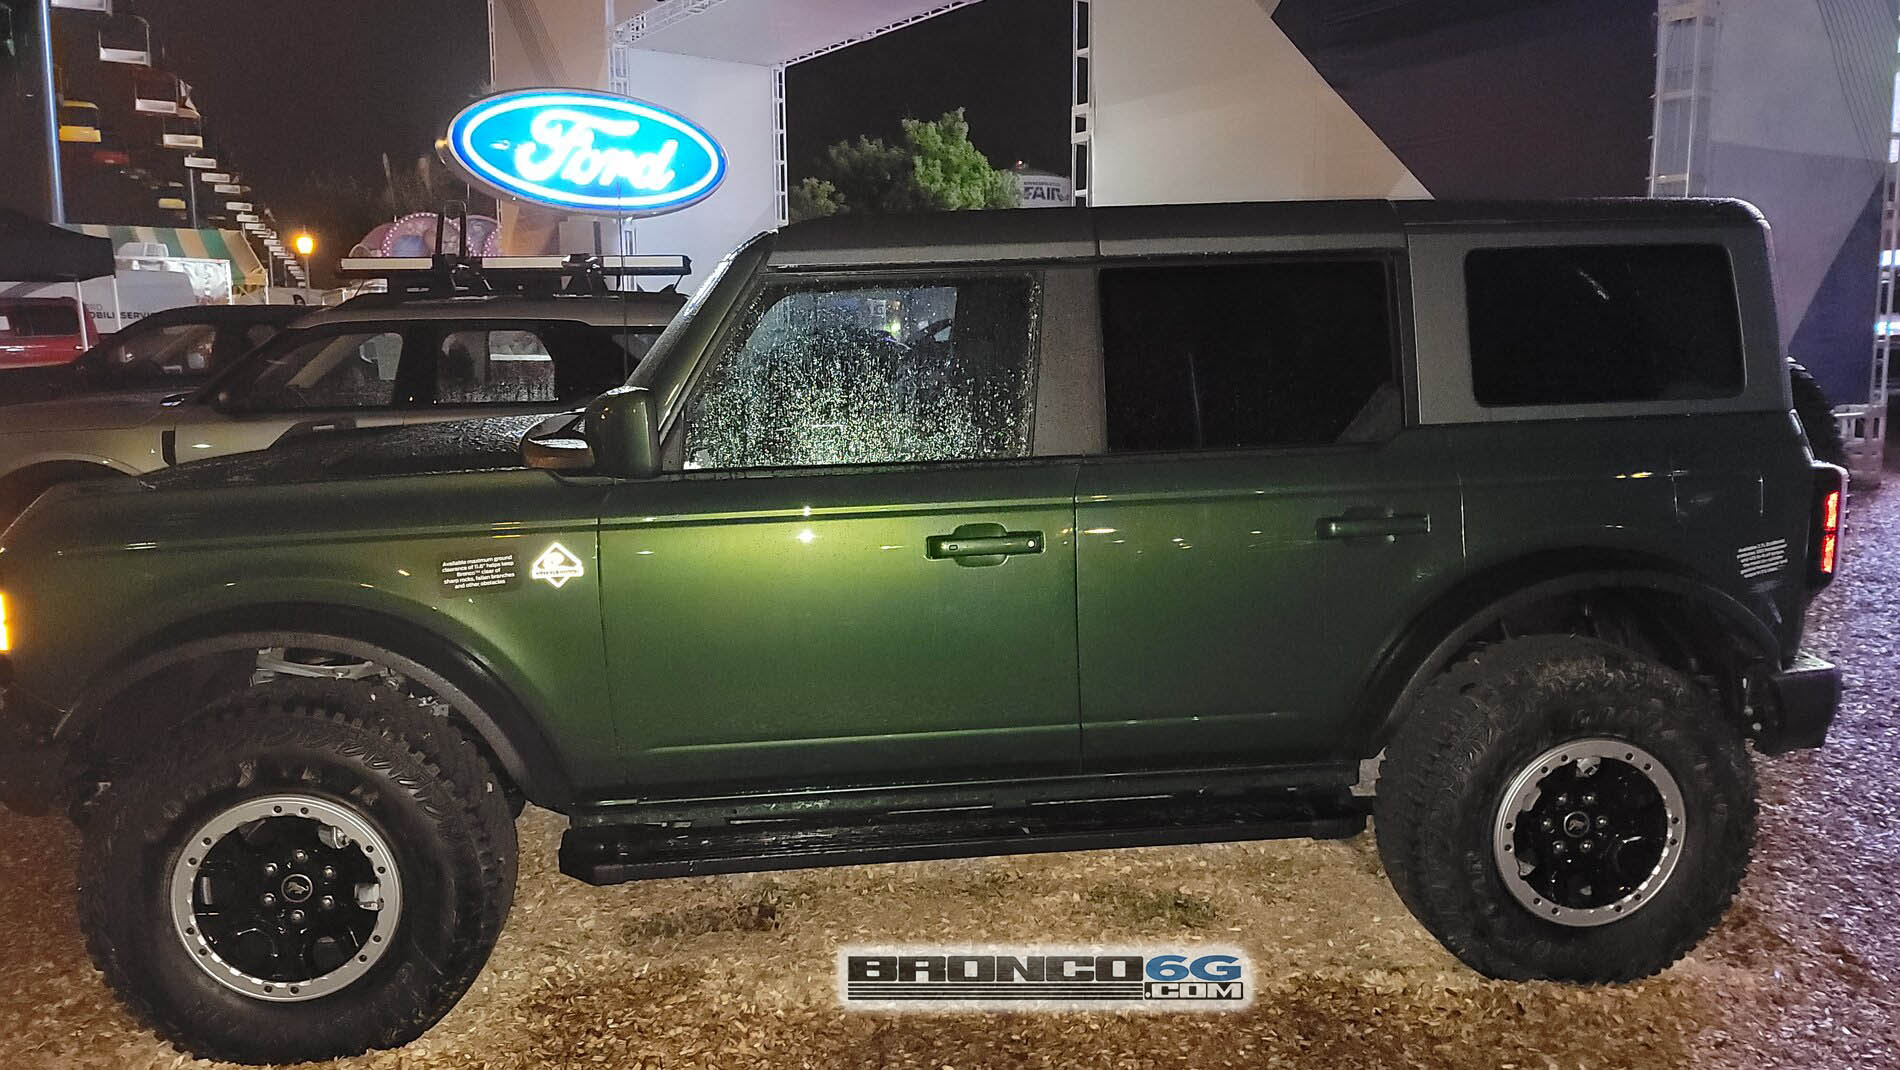 Ford Bronco Eruption Green Bronco Outer Banks spotted at MN State fair 2022 Bronco Euruption Green Outer Banks Spotted 5